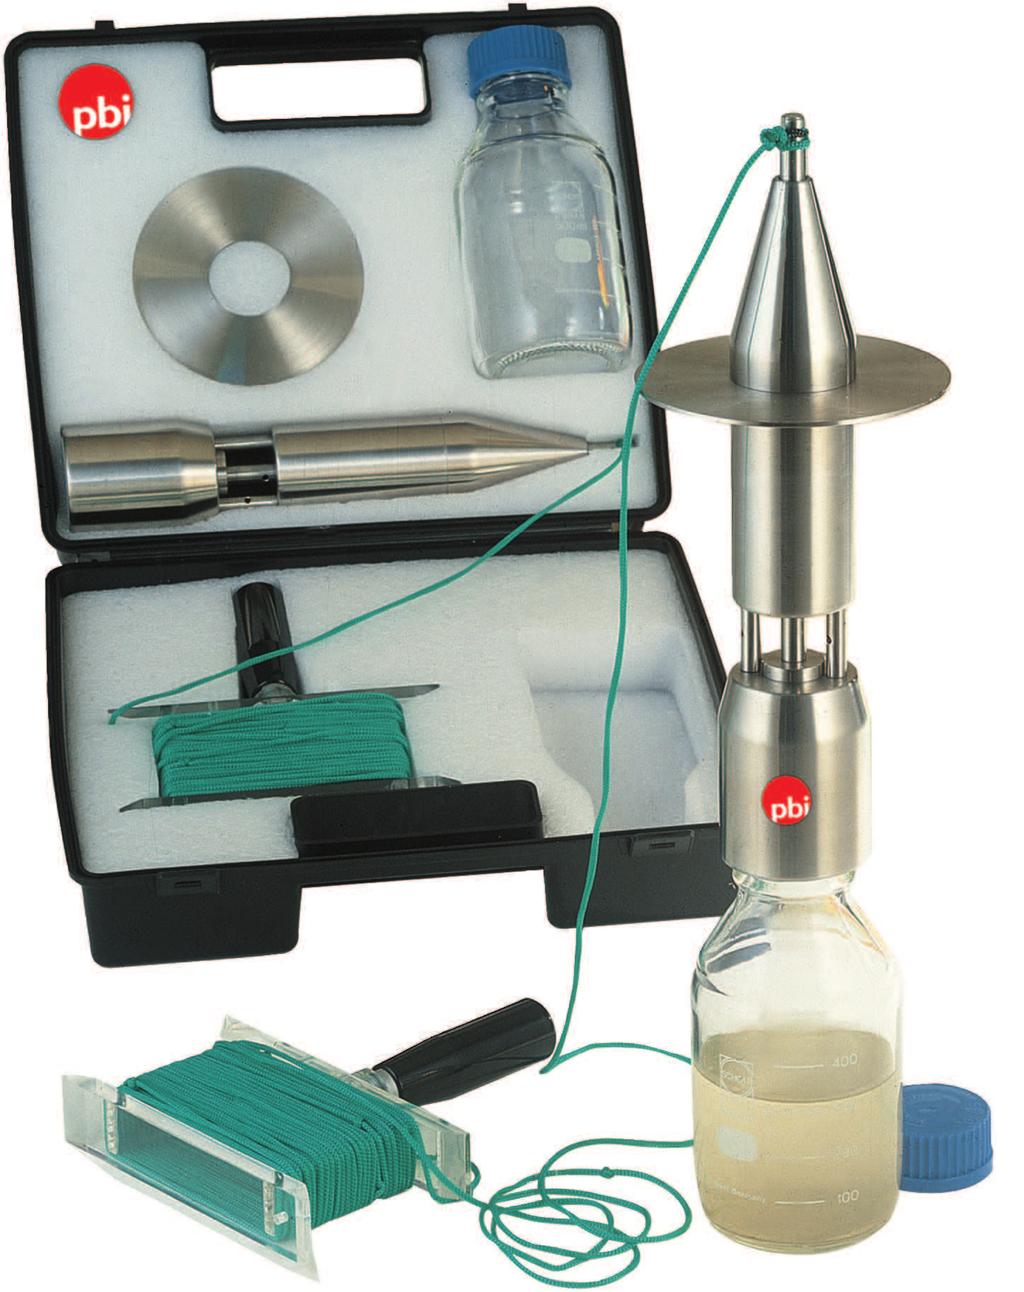 MARE-LACUS DEEP WATER SAMPLING KIT It gives the possibility to collect water samples at a predetermined depth in sterile or non-sterile conditions (maximum depth 15 meters) The case is stuffed with